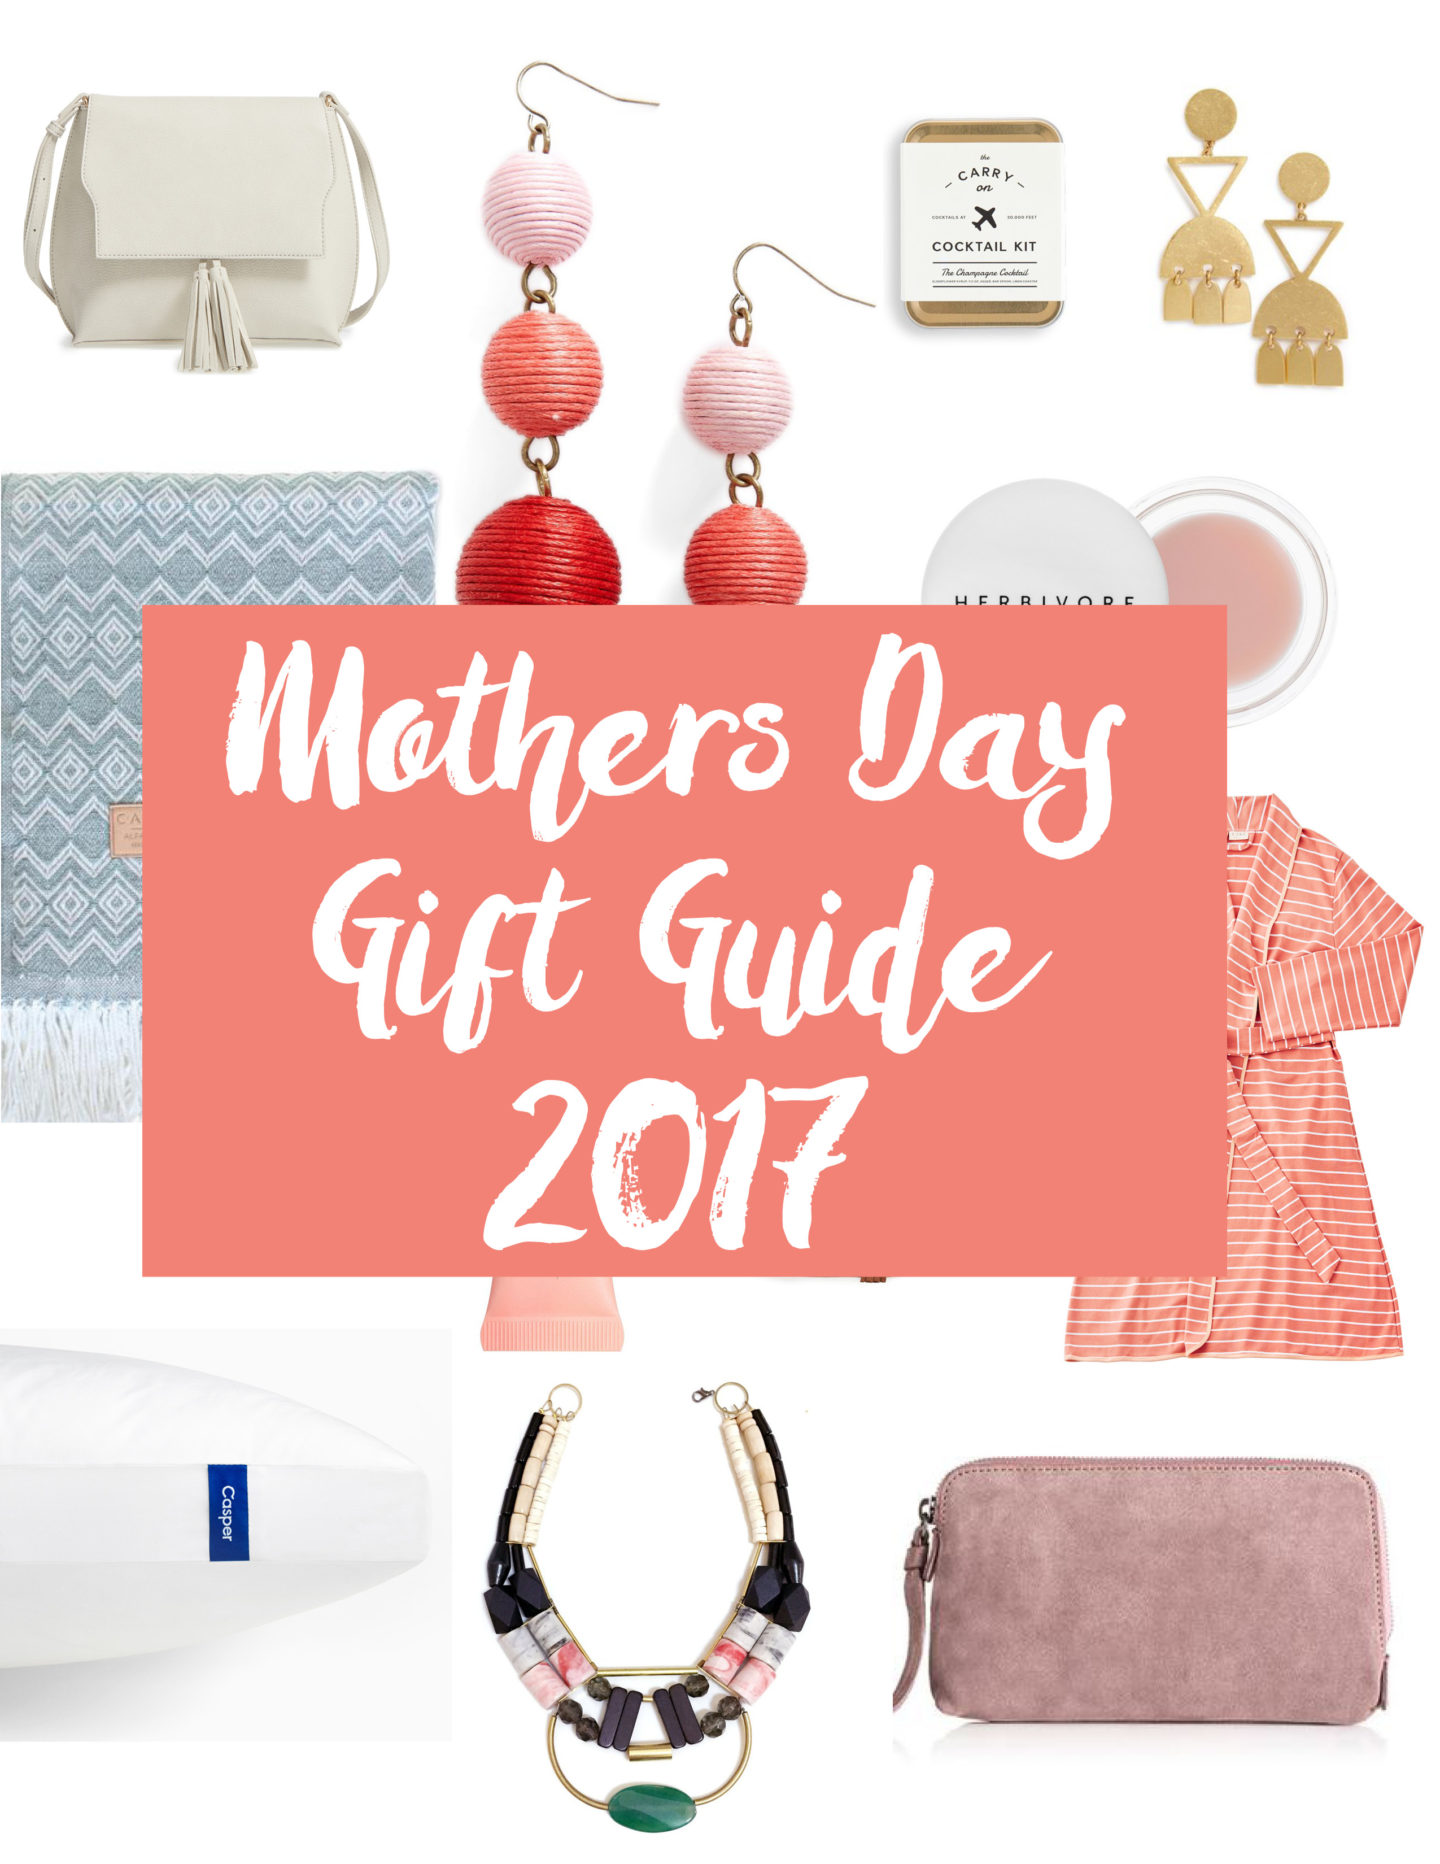 Your Go-to Mothers Day Gift Guide for 2017